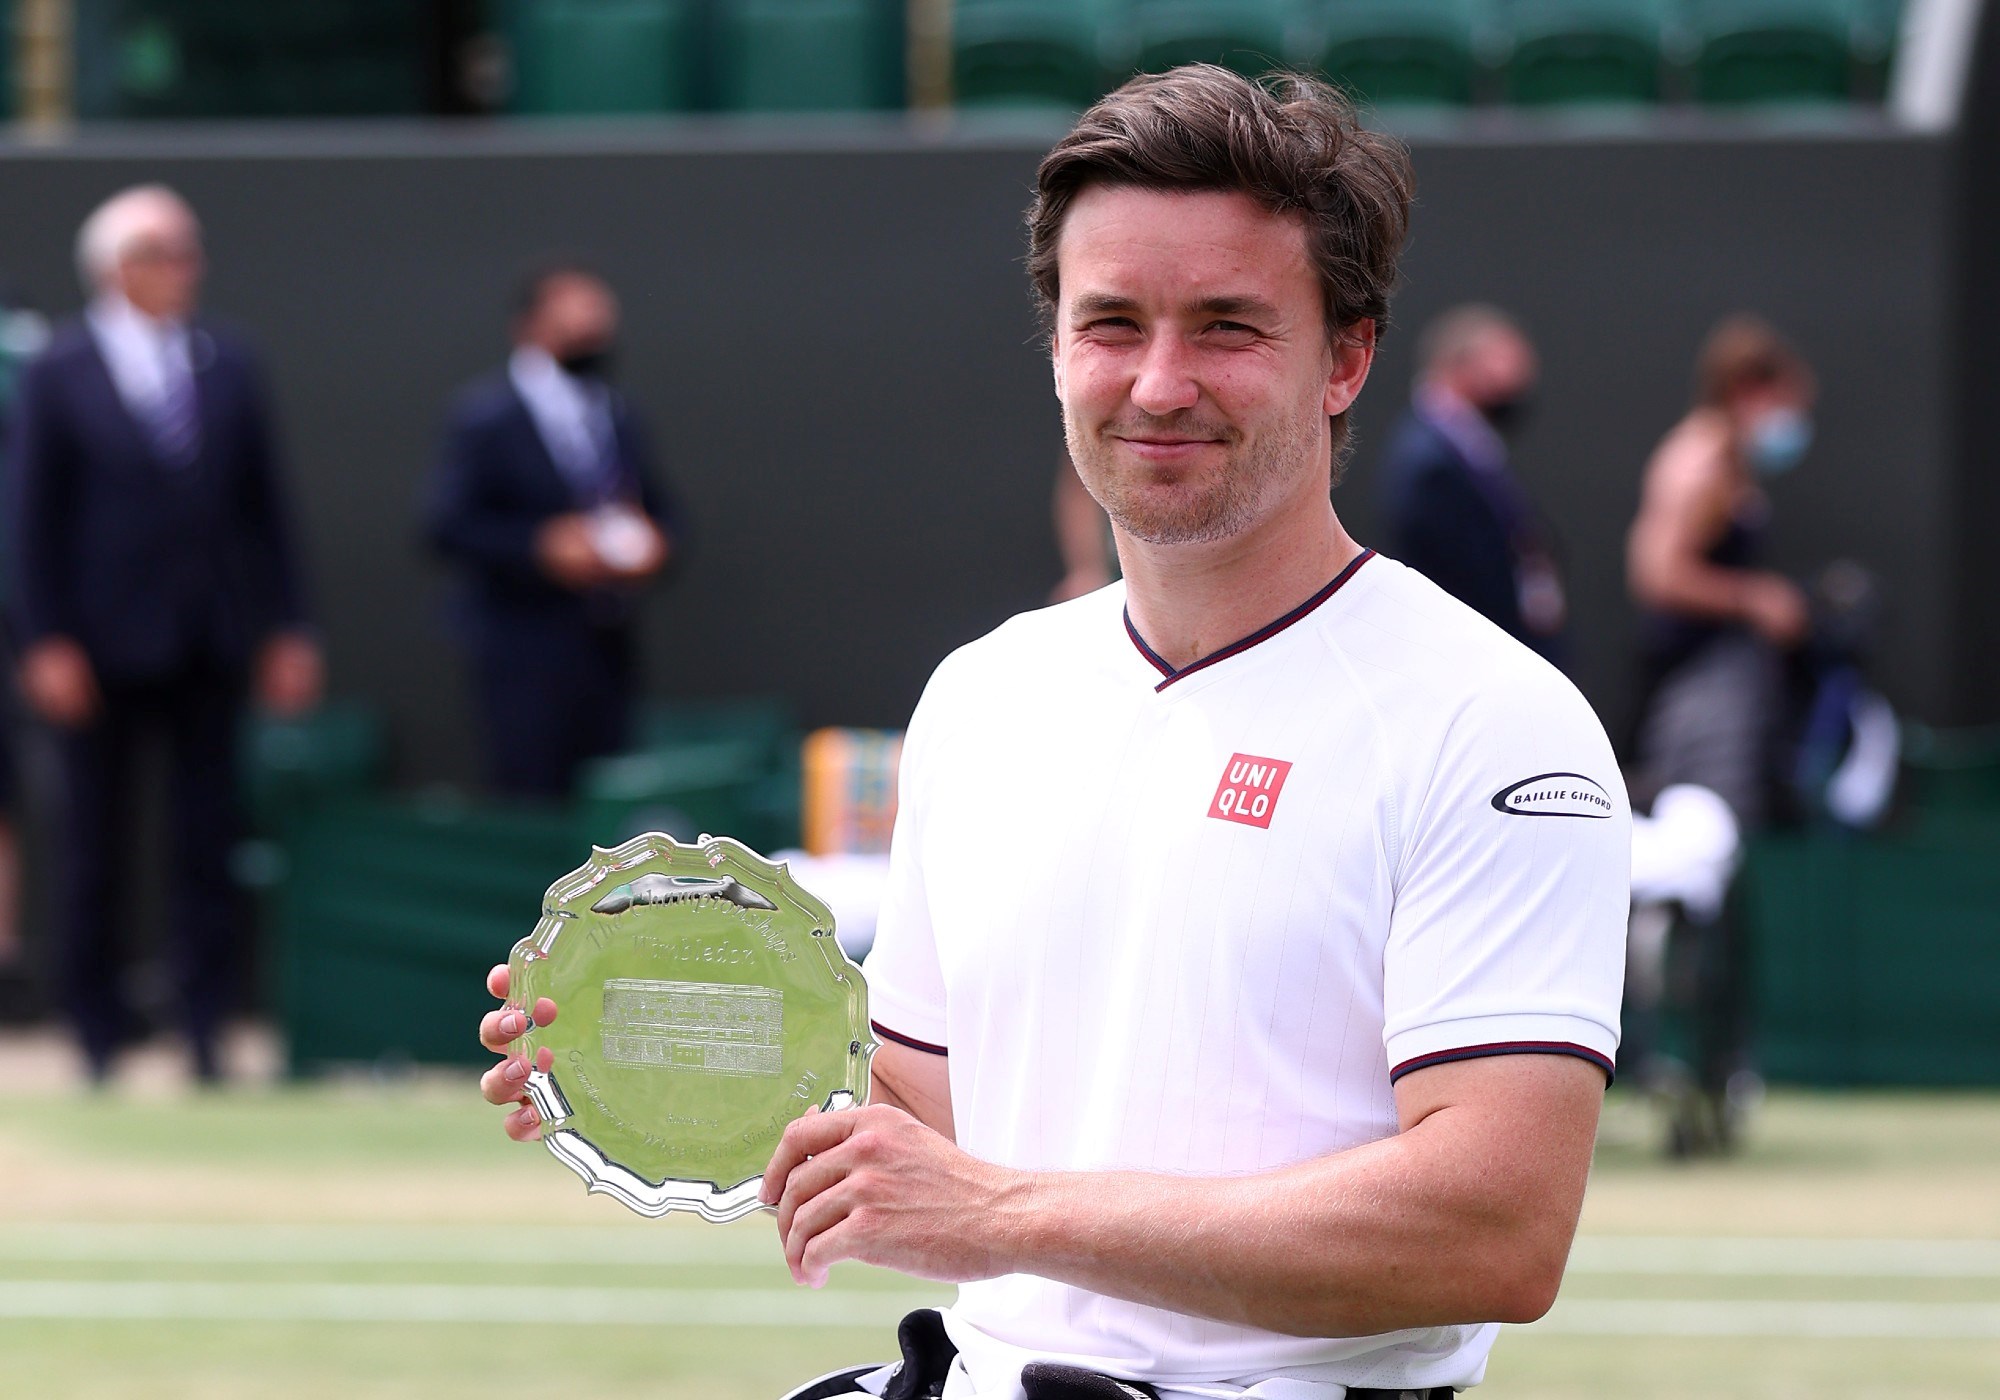 Gordon Reid of Great Britain poses with the runner up trophy after his men's wheelchair singles final match against Joachim Gerard of Belgium during Day Thirteen of The Championships - Wimbledon 2021